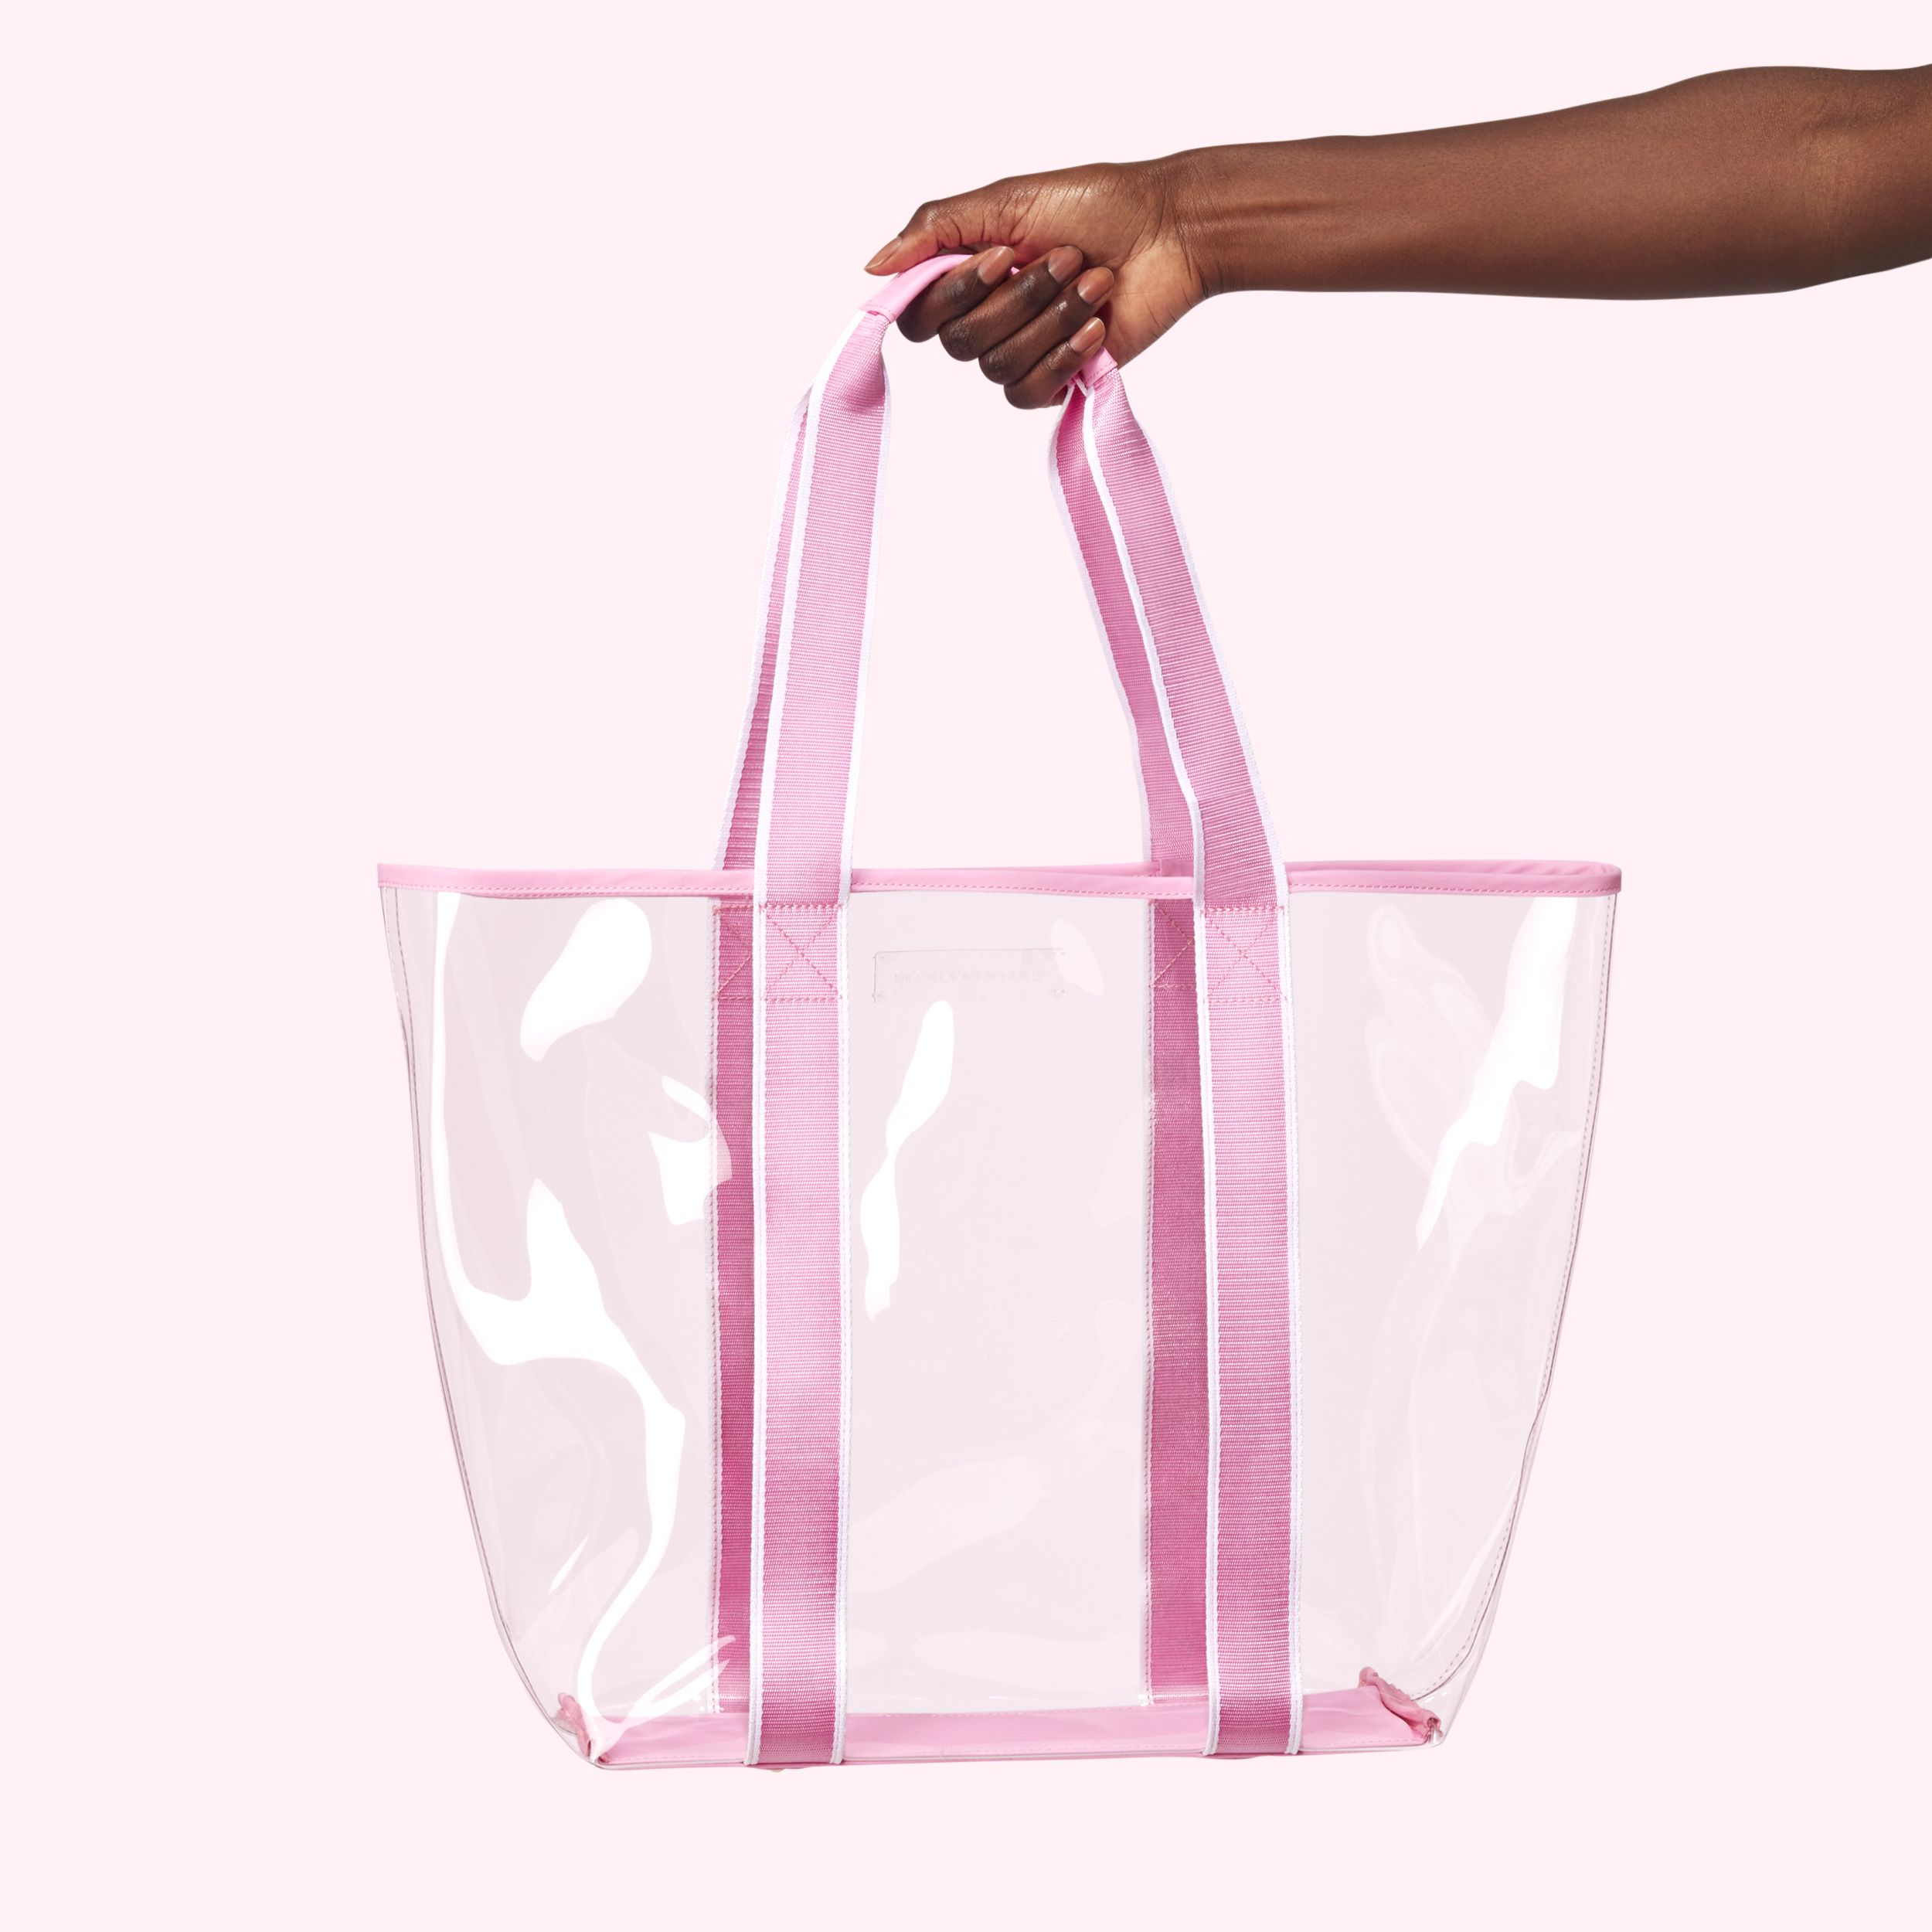 Clear Tote Bag | Clear Tote Bag - Stoney Clover Lane | Stoney Clover Lane